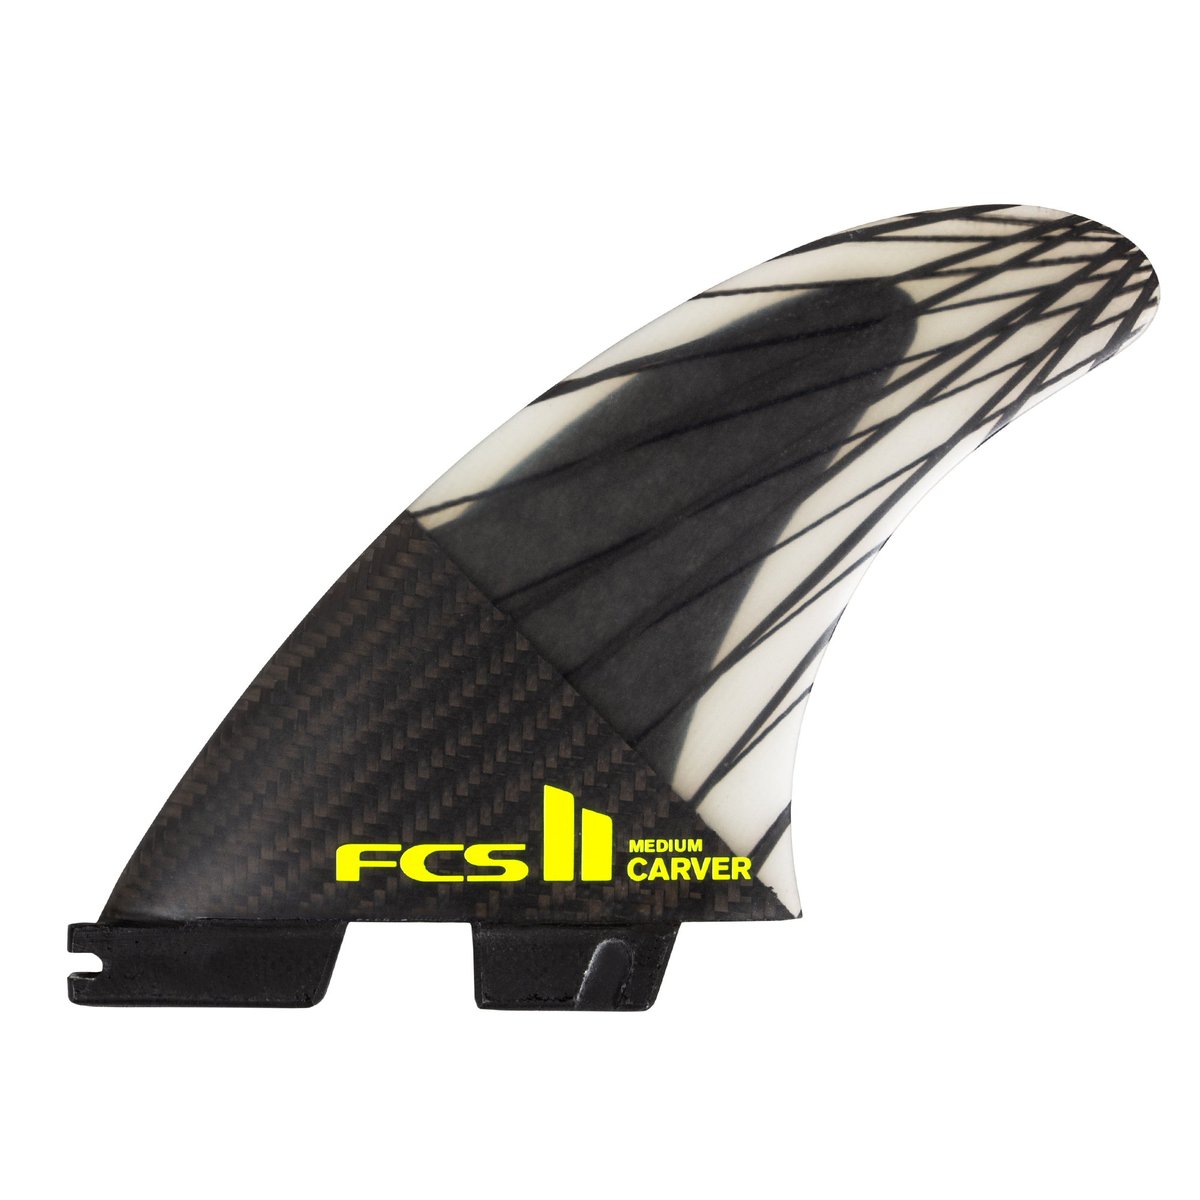 FCS2 フィン エフシーエス2 CARVER PC CARBON TRI FINS M,Lサイズ トライフィン ショートボード フィン 3本セット Performance Core Carbon